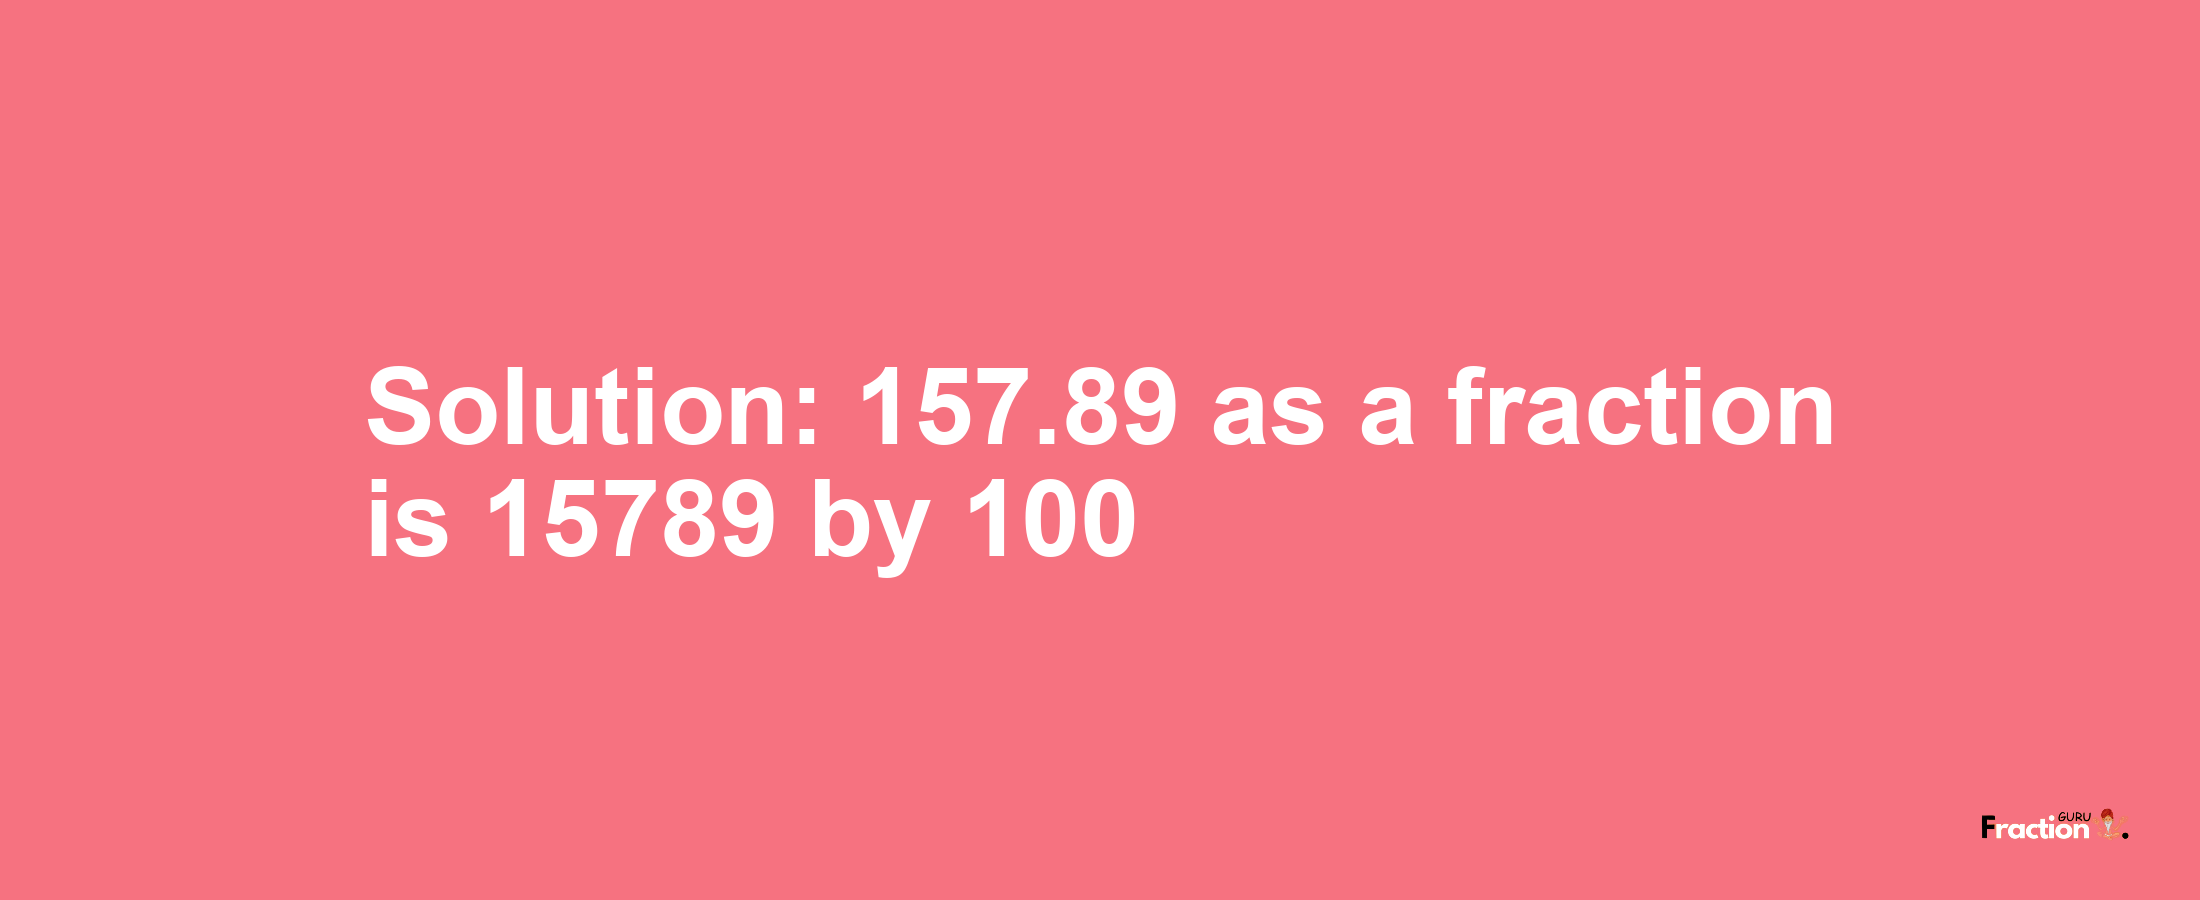 Solution:157.89 as a fraction is 15789/100